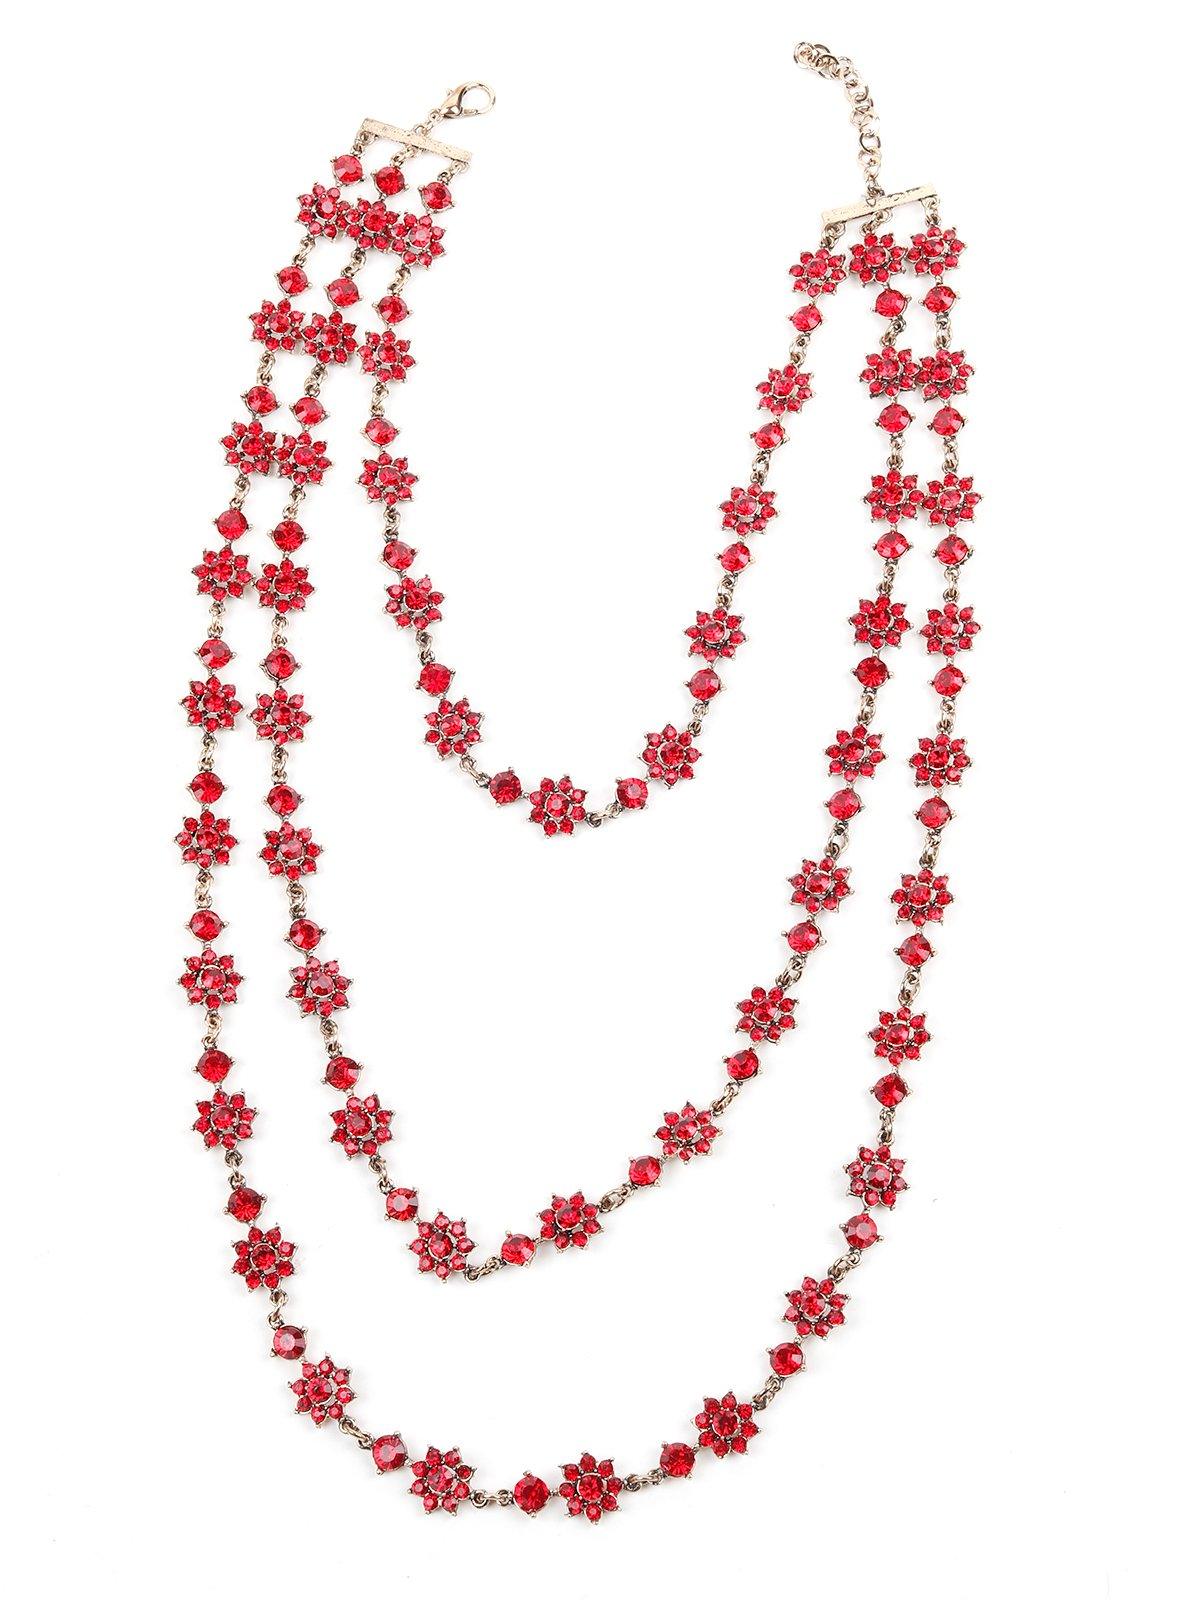 Women's Exquisite Designer 3 Layered Necklace With Crystal. - Red - Odette